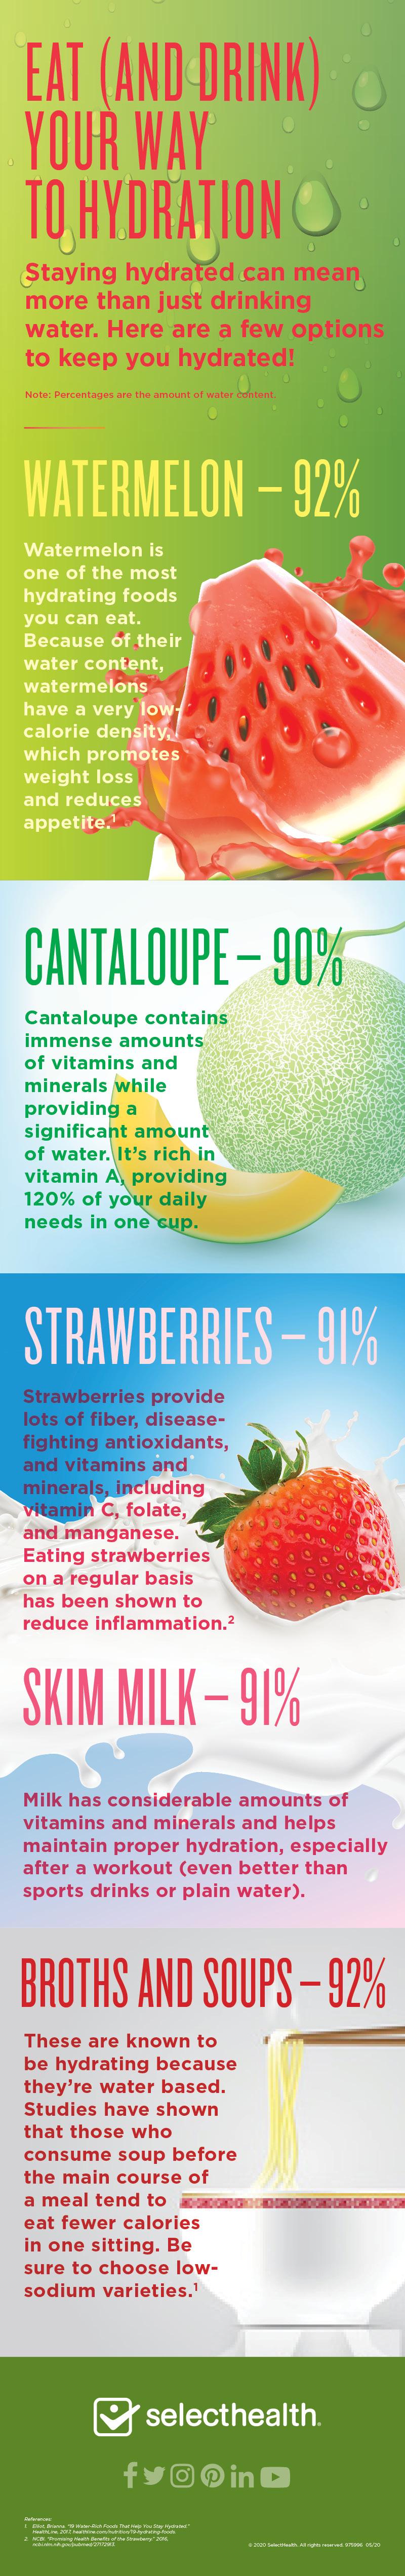 Infographic illustrating how you can eat and drink foods to help you stay hydrated besides water